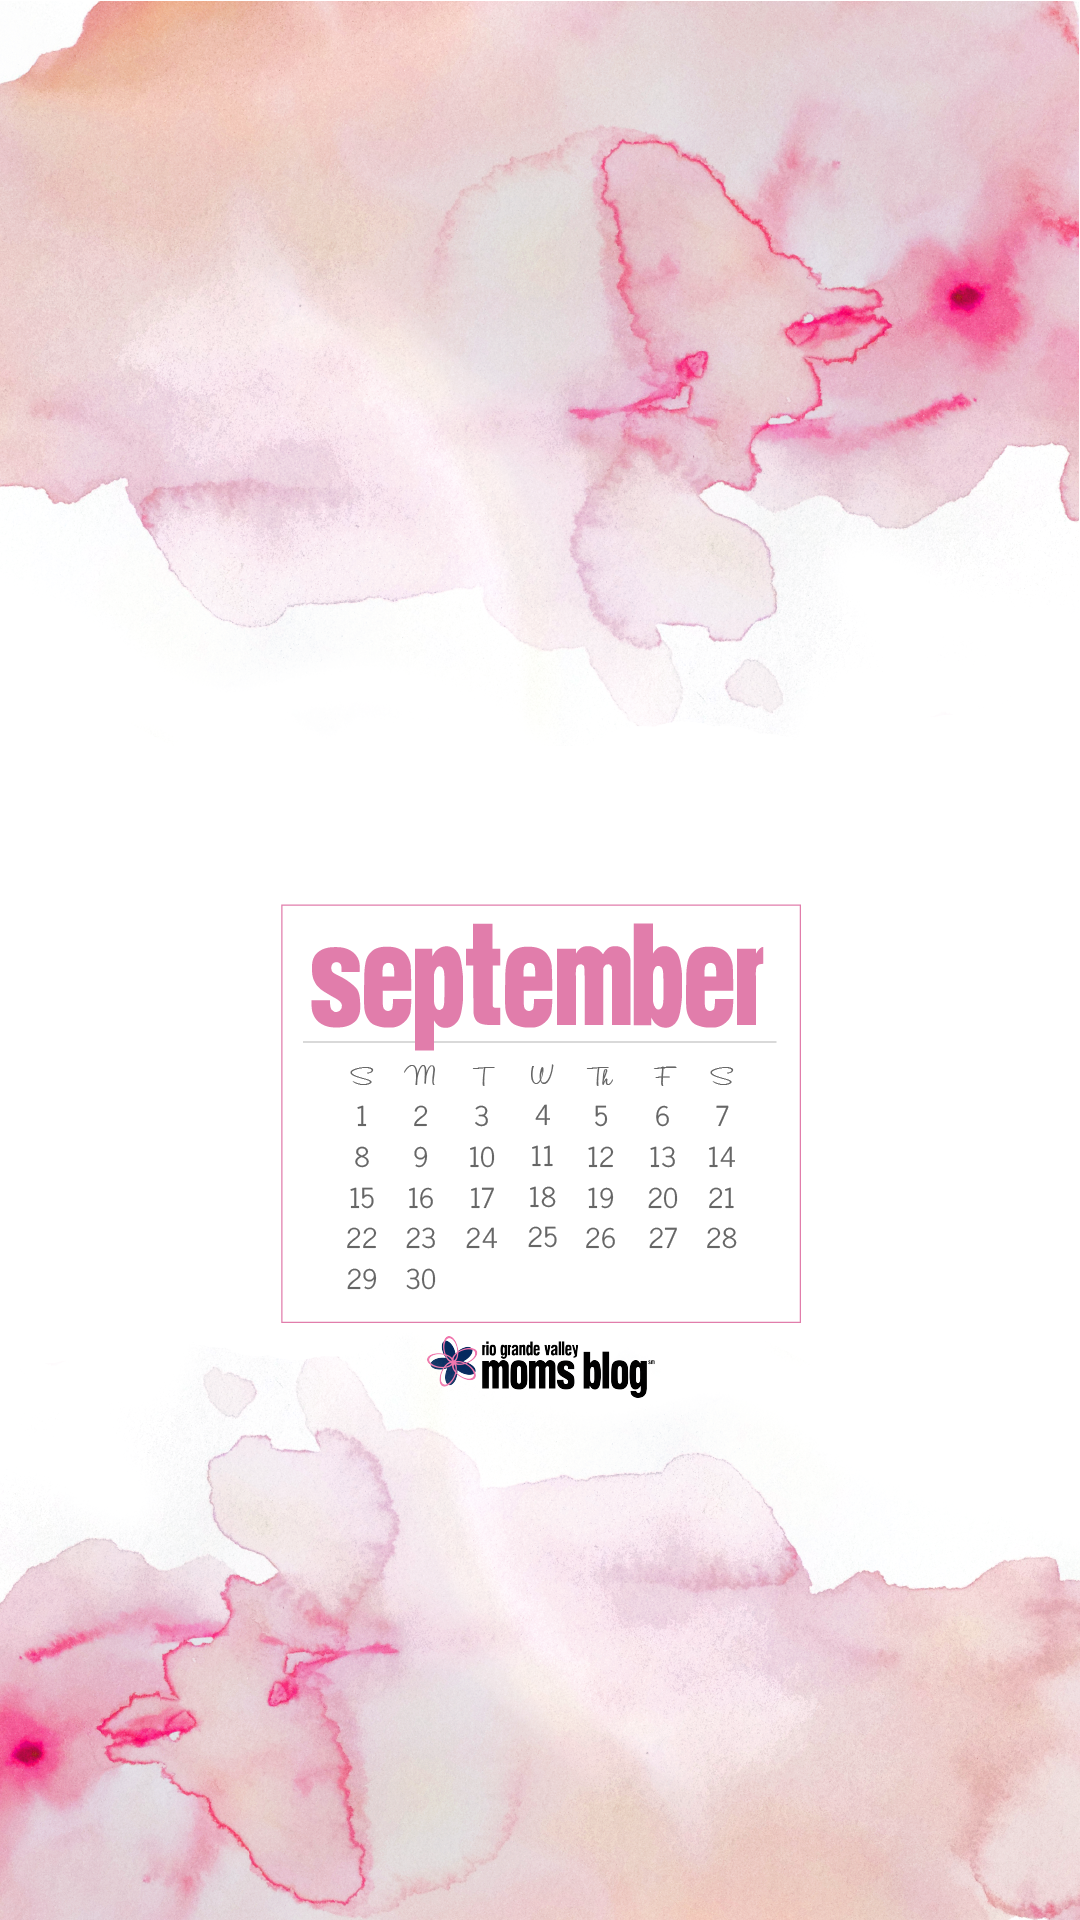 September 2019 Phone Background Watercolor